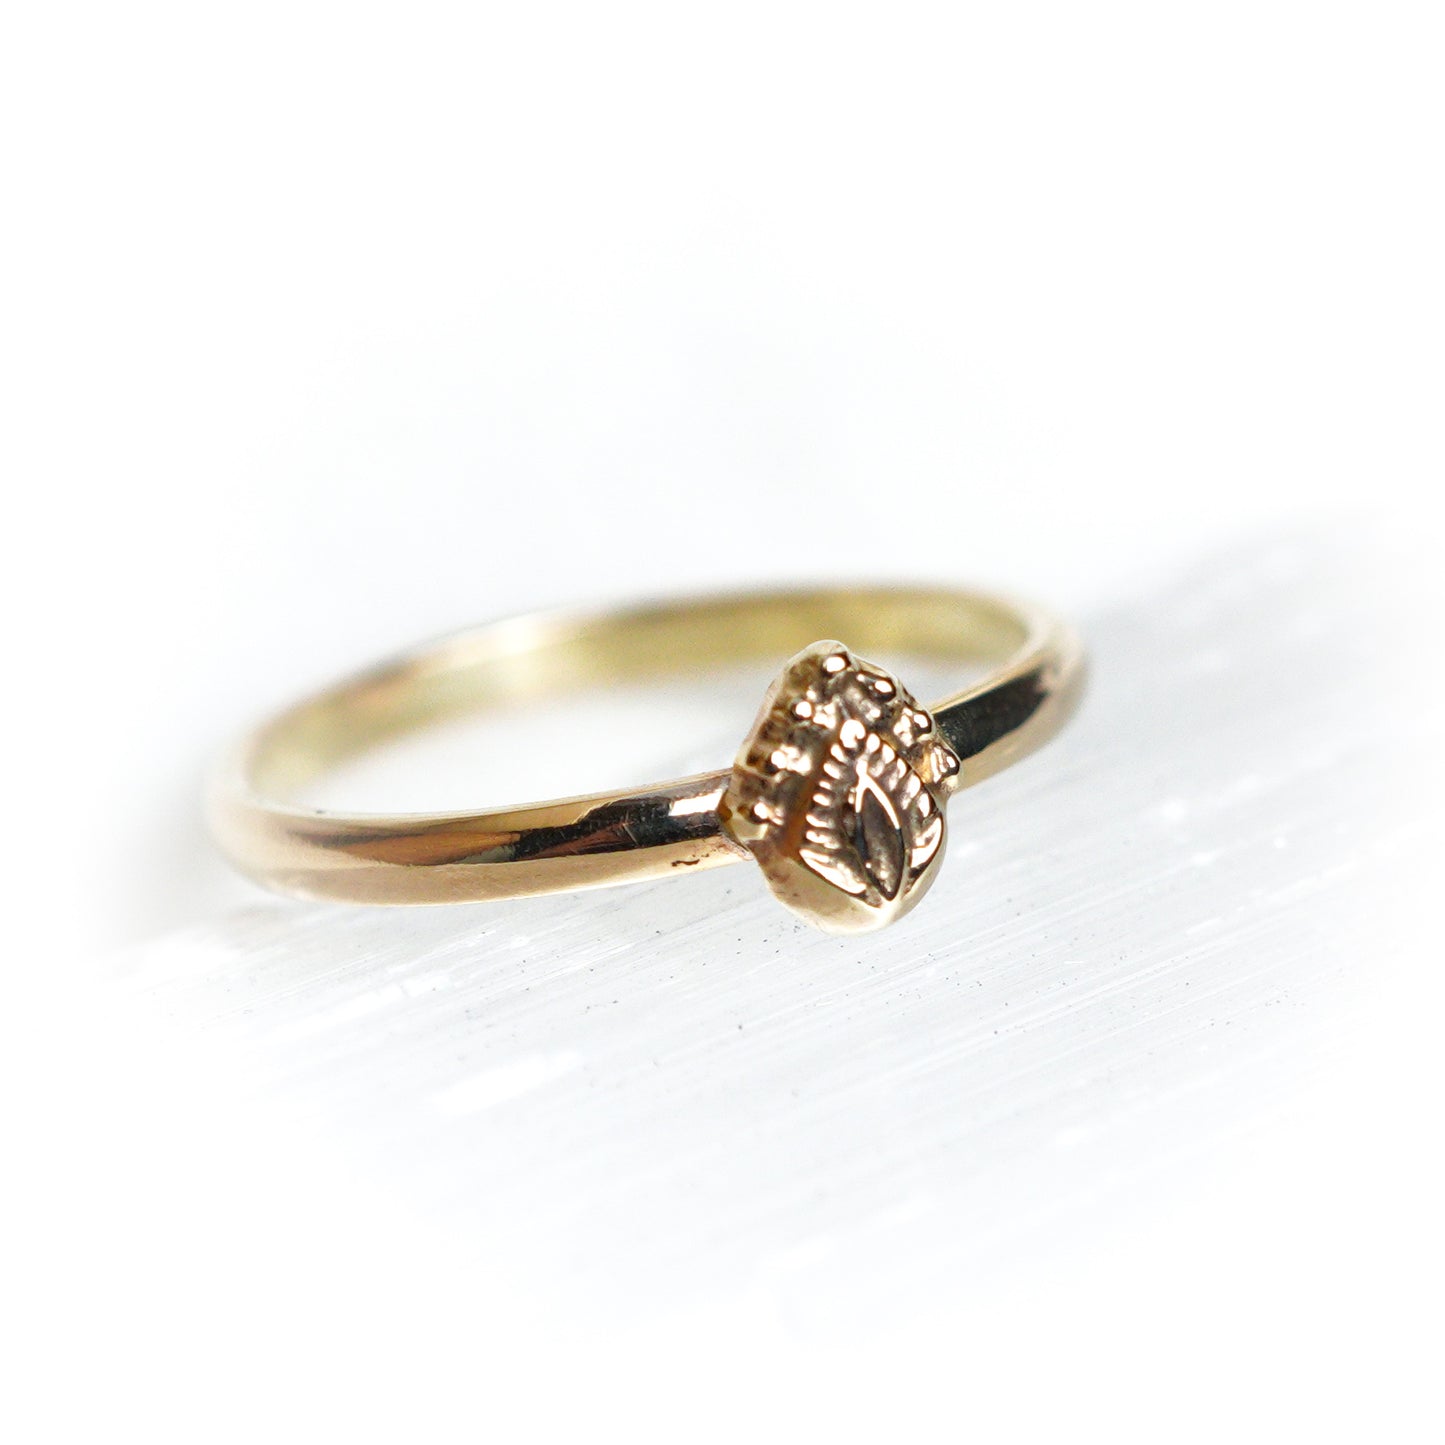 9ct Gold Indian Flower Ring ✦ UK Size P ✦